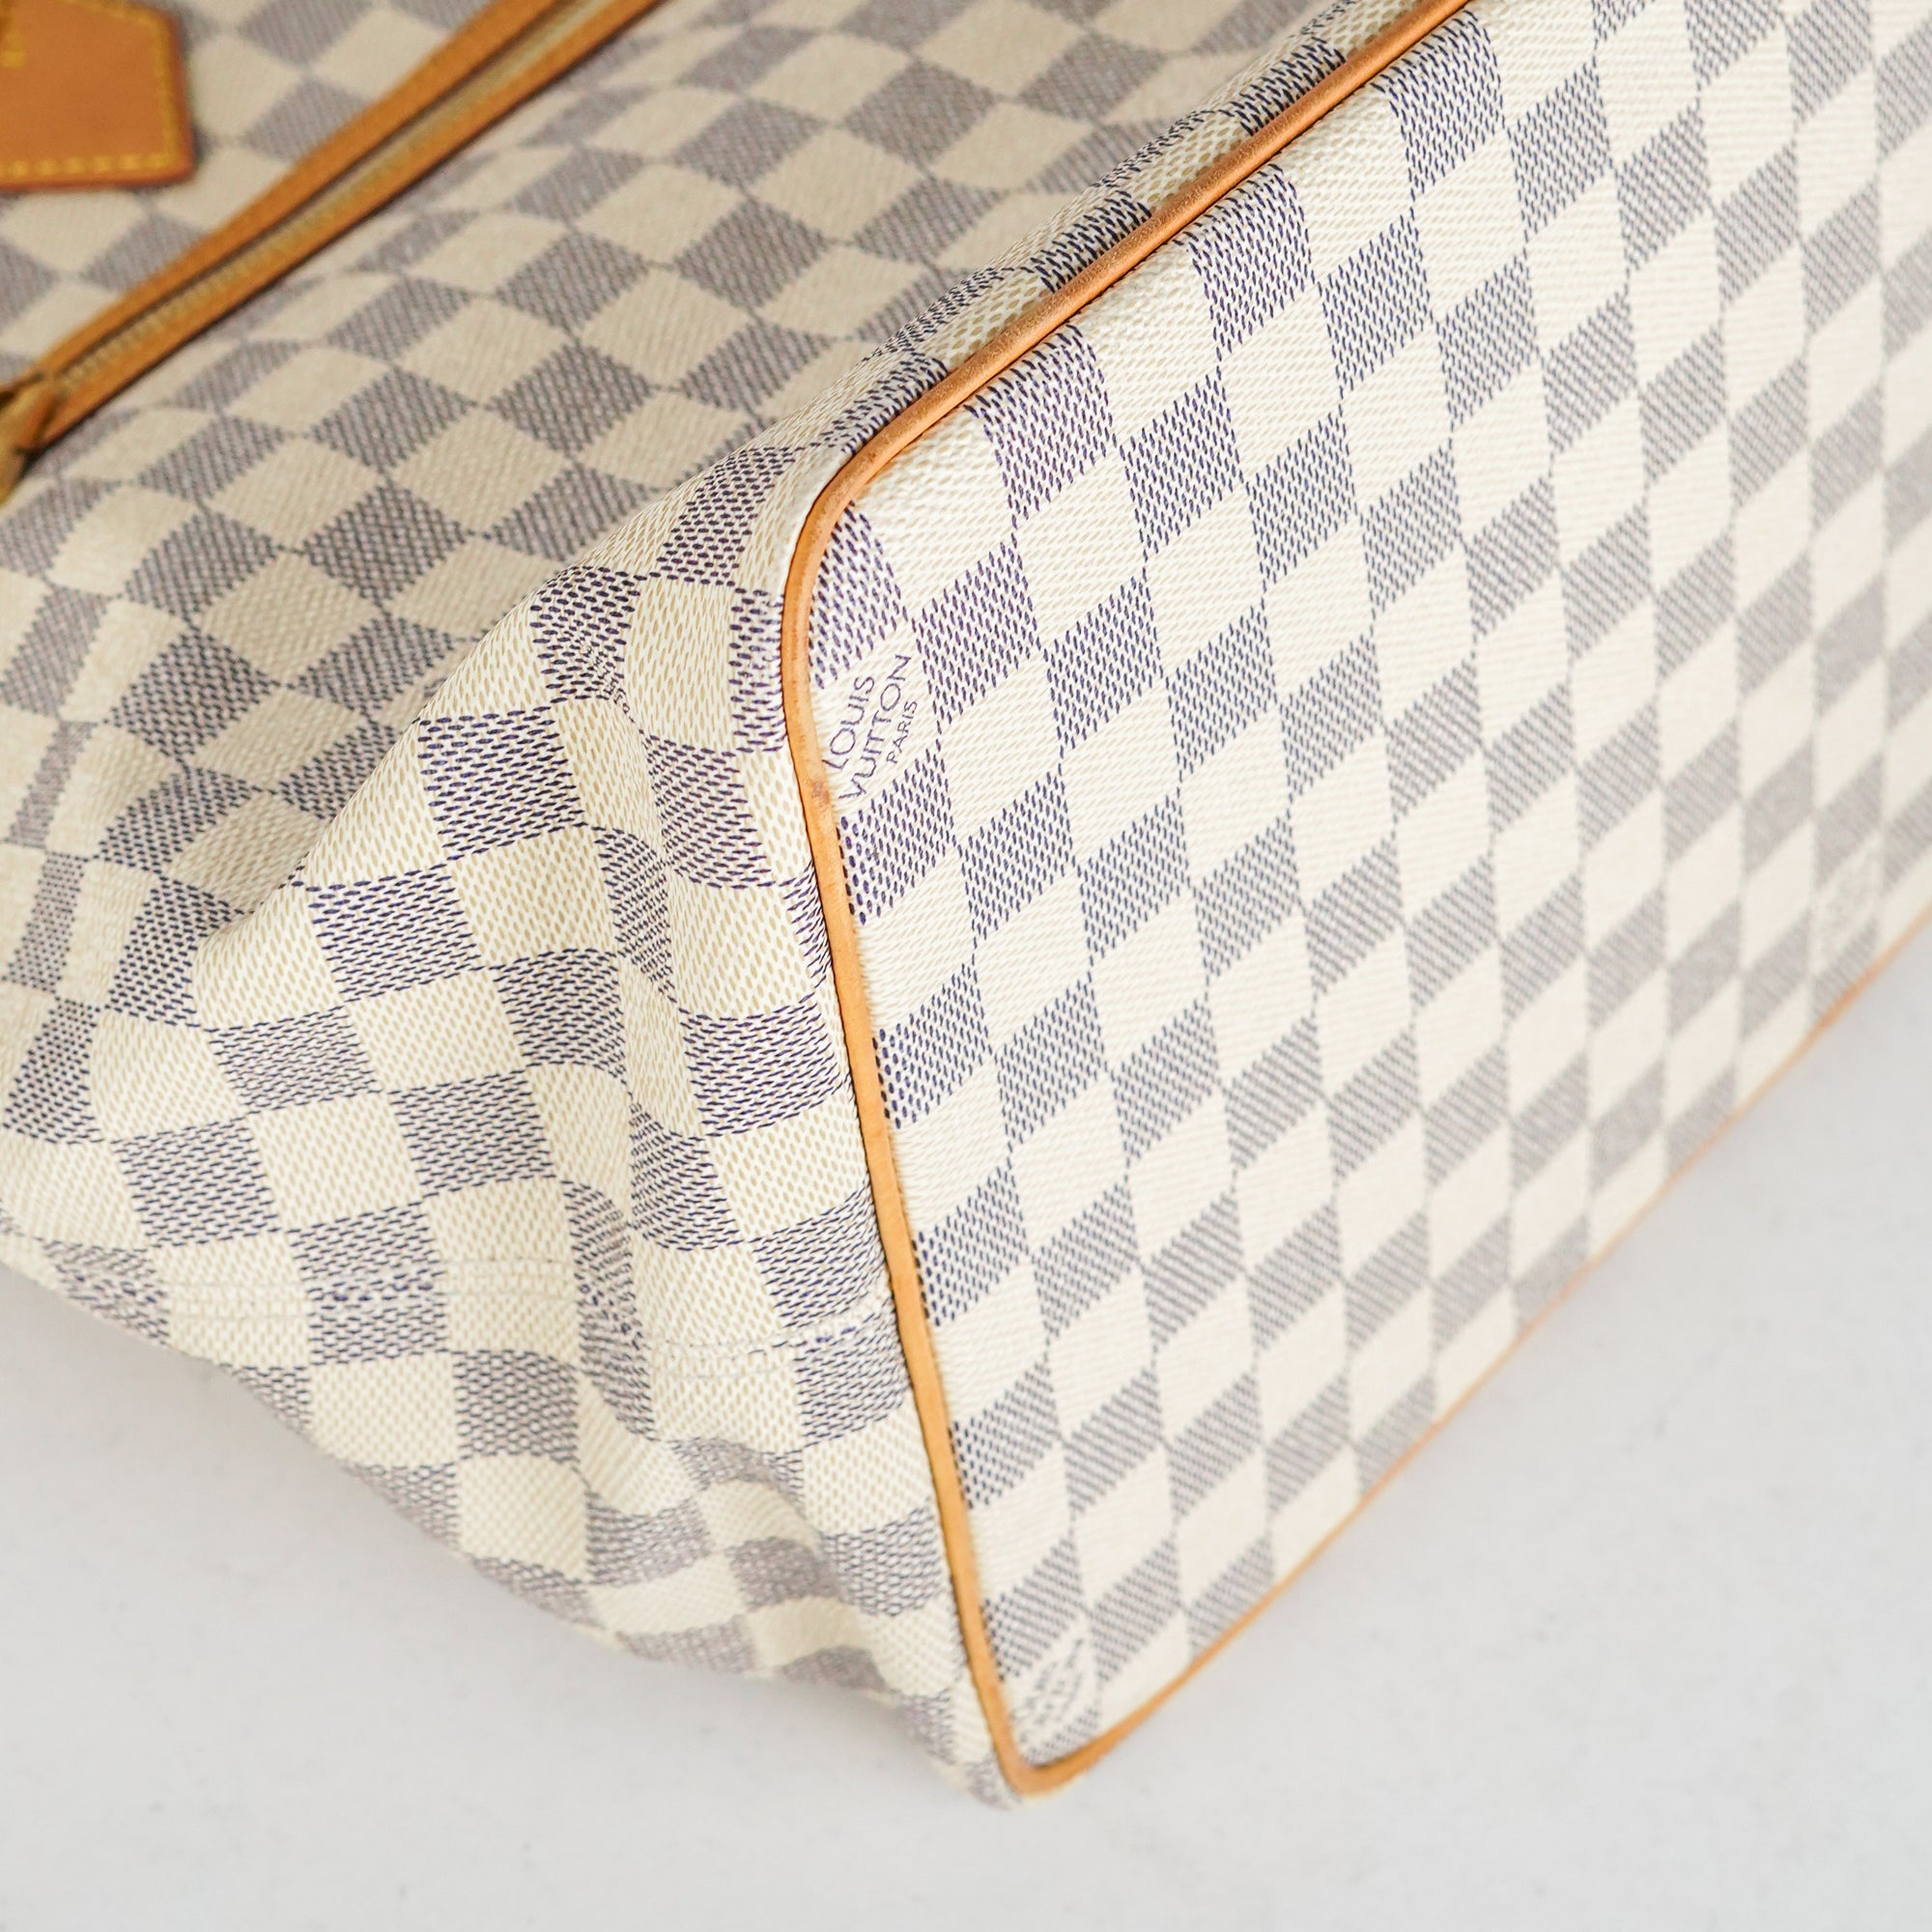 LOUIS VUITTON LOUIS VUITTON Saleya PM Tote Bag N51186 Damier Azur canvas White  Used Women N51186｜Product Code：2106800504224｜BRAND OFF Online Store